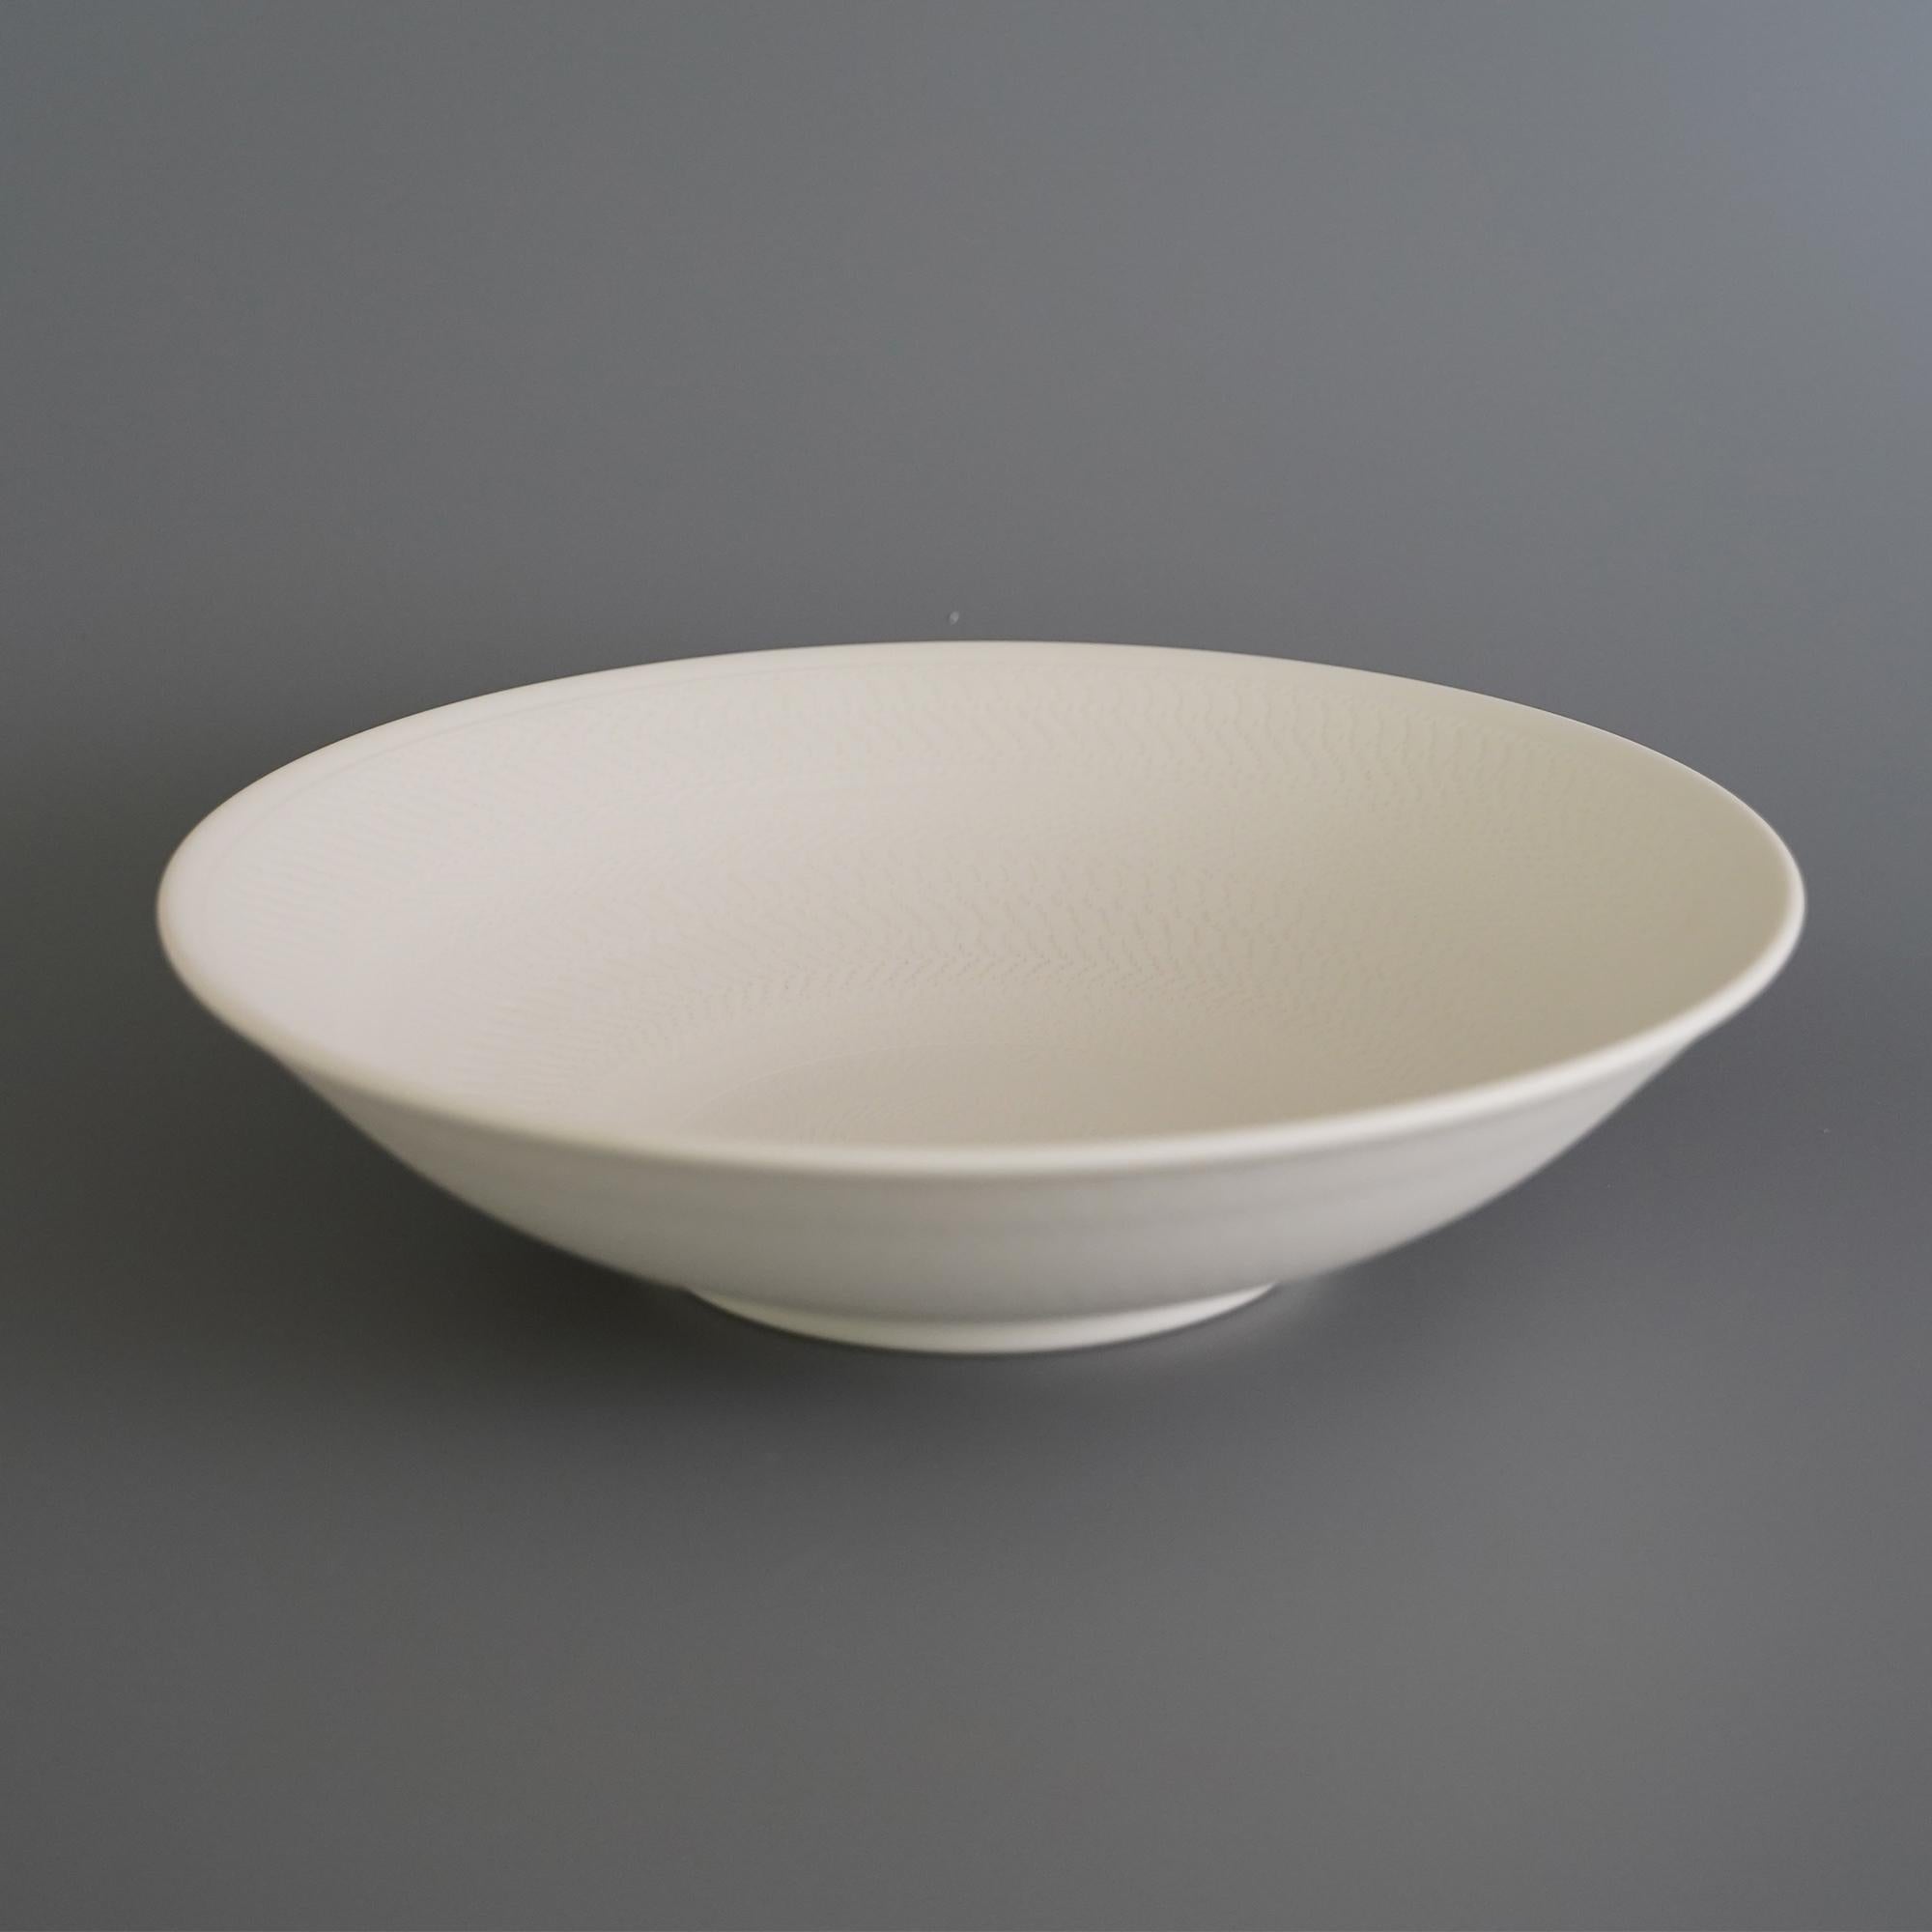 Set of 2 Helice fruit bowl by Studio Cúze
Dimensions: W 27 x H 6.5 cm
Materials: ceramic

The Helice Fruit Bowl is an all-white bowl with a special quality and a unique handmade pattern. The bowl offers an even and precise shape, which is